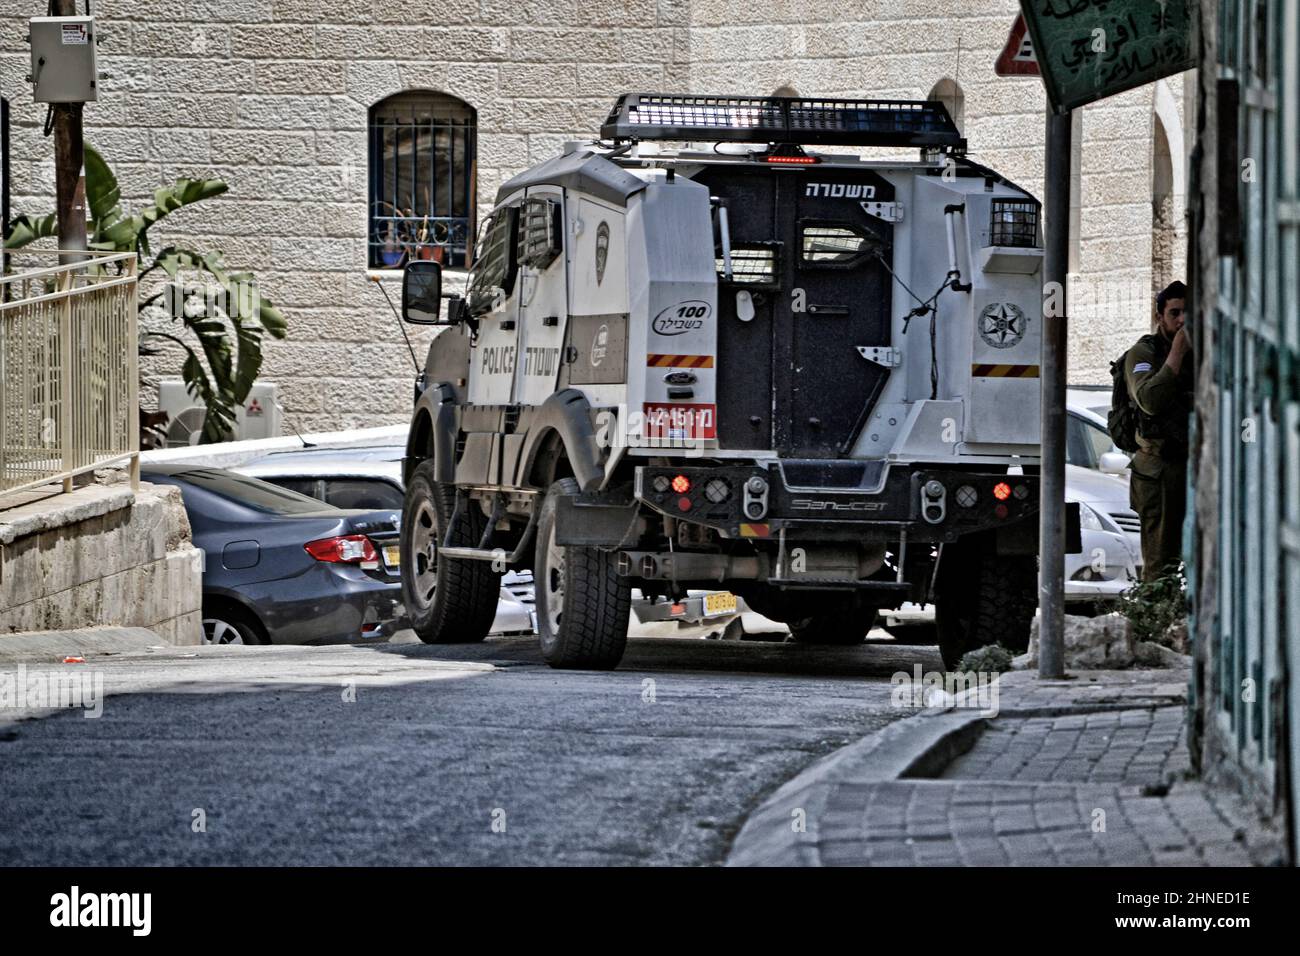 Vehicle of Israeli police patrolling the streets in the West Bank Stock Photo